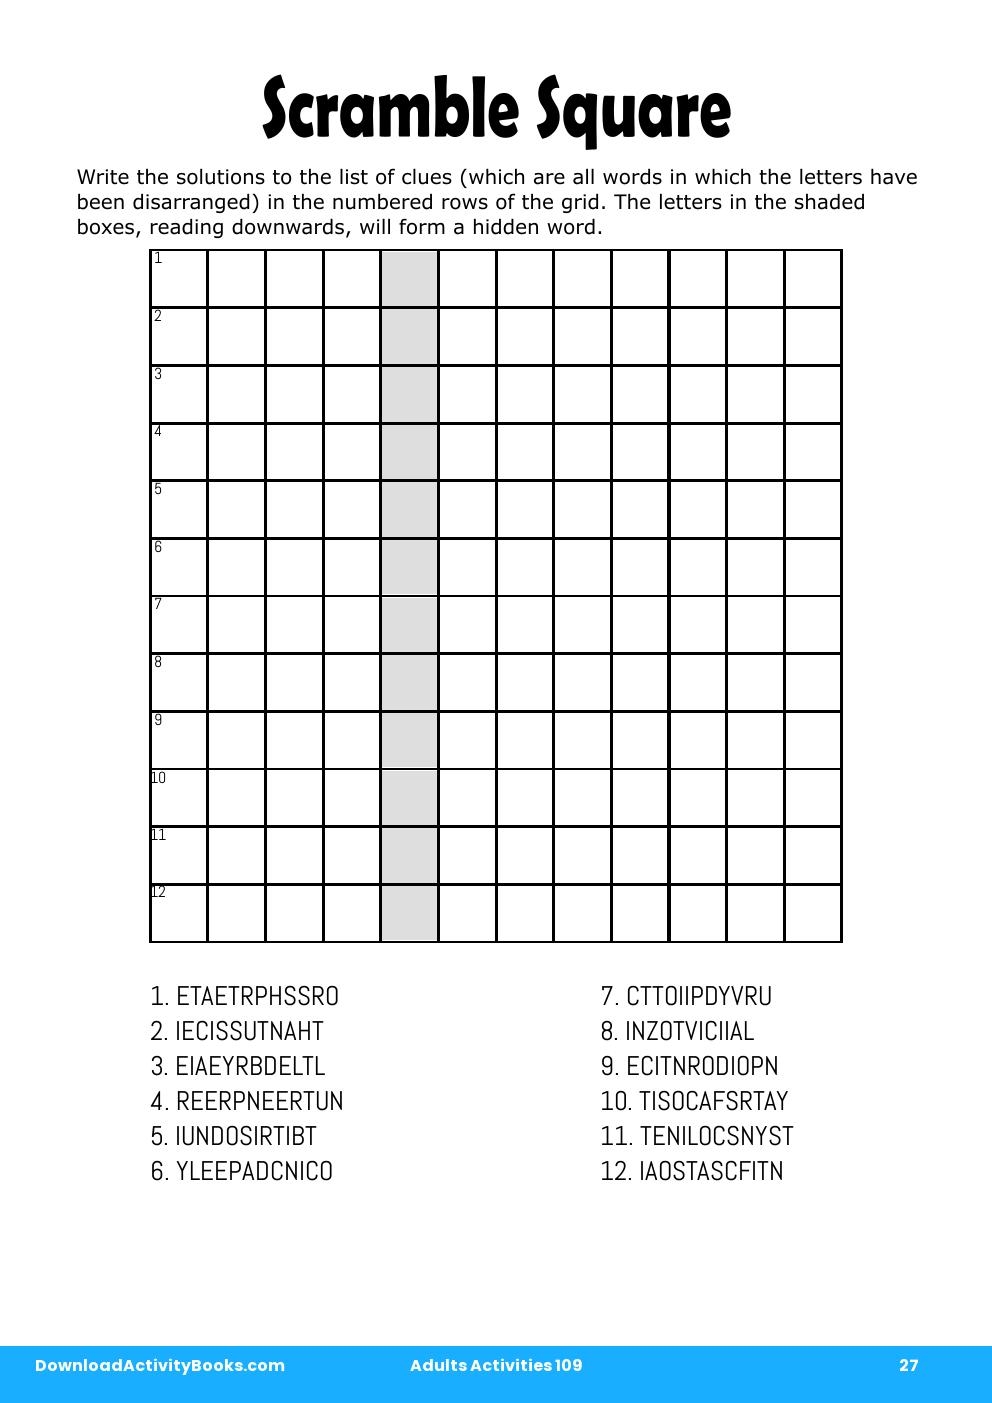 Scramble Square in Adults Activities 109